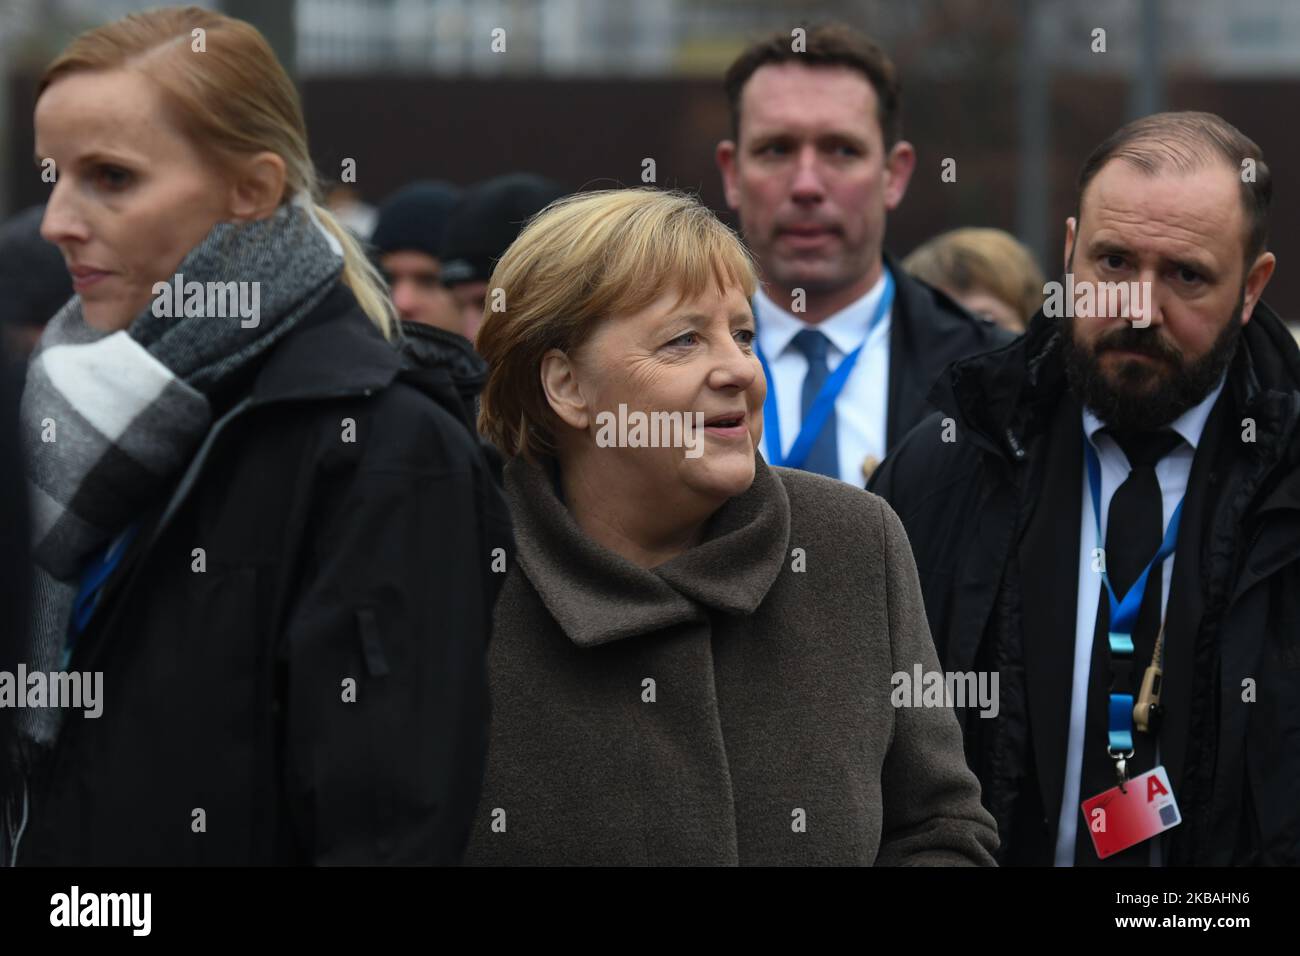 Angela Merkel (Center), Germany's Chancellor, surrounded by her protection guards, meets members of the public outside the Berlin Wall Memorial at Bernauer Strasse during a commemoration ceremony for the 30th anniversary of the fall of the Berlin Wall. On Saturday, November 9, 2019, in Berlin, Germany. (Photo by Artur Widak/NurPhoto) Stock Photo